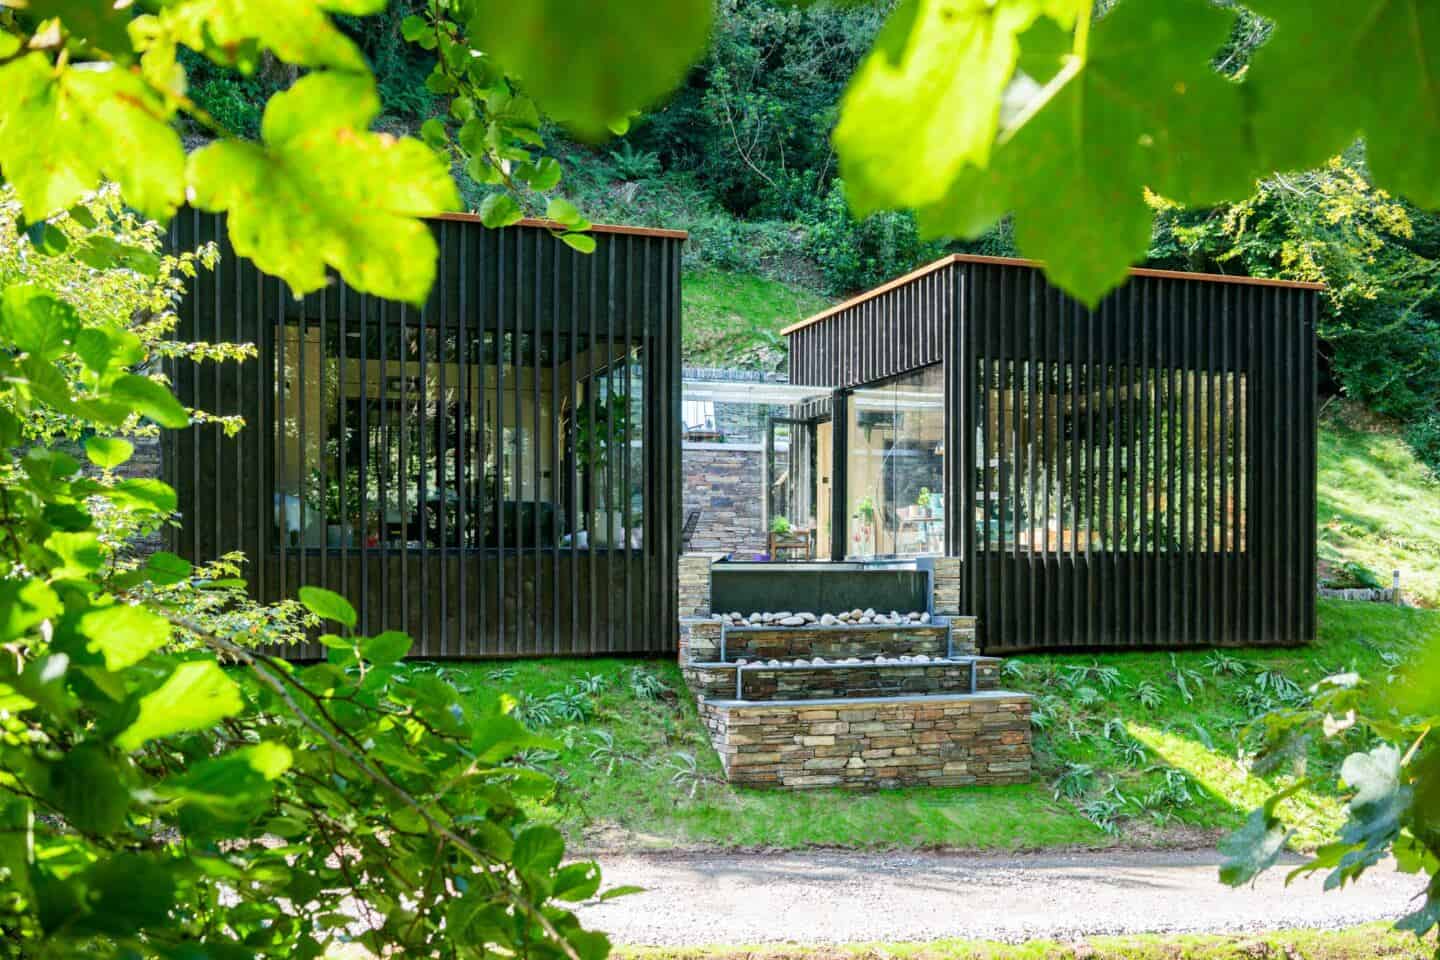 Wildwood Spa in the forest of North Devon is clad in black timber that has been treated using the Japanese technique of Shou Sugi Ban